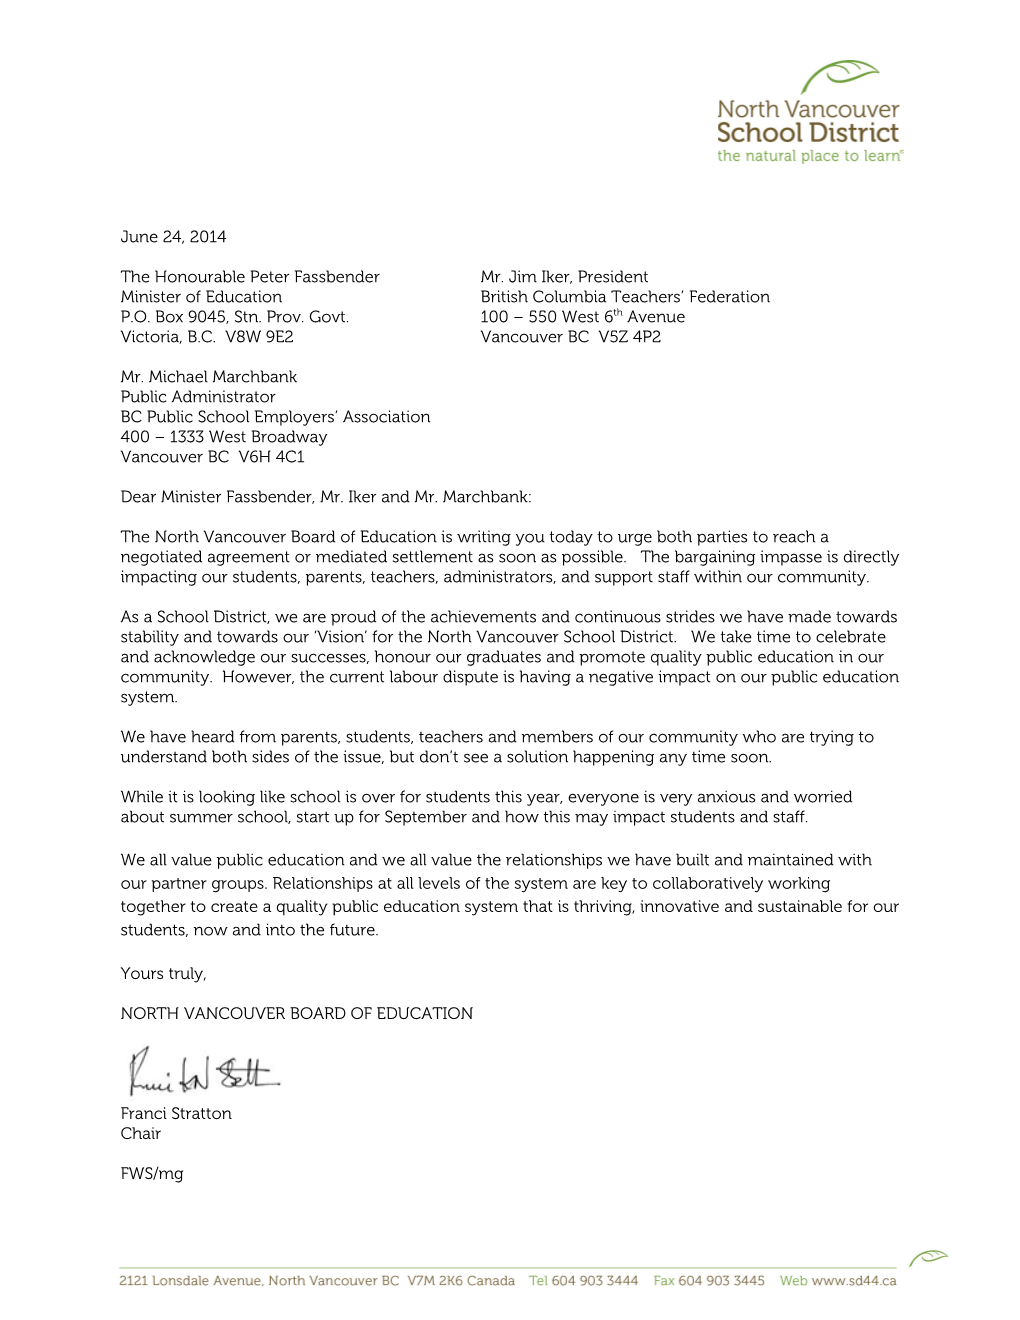 Letter from Board Chair Franci Stratton to Education Minister Peter